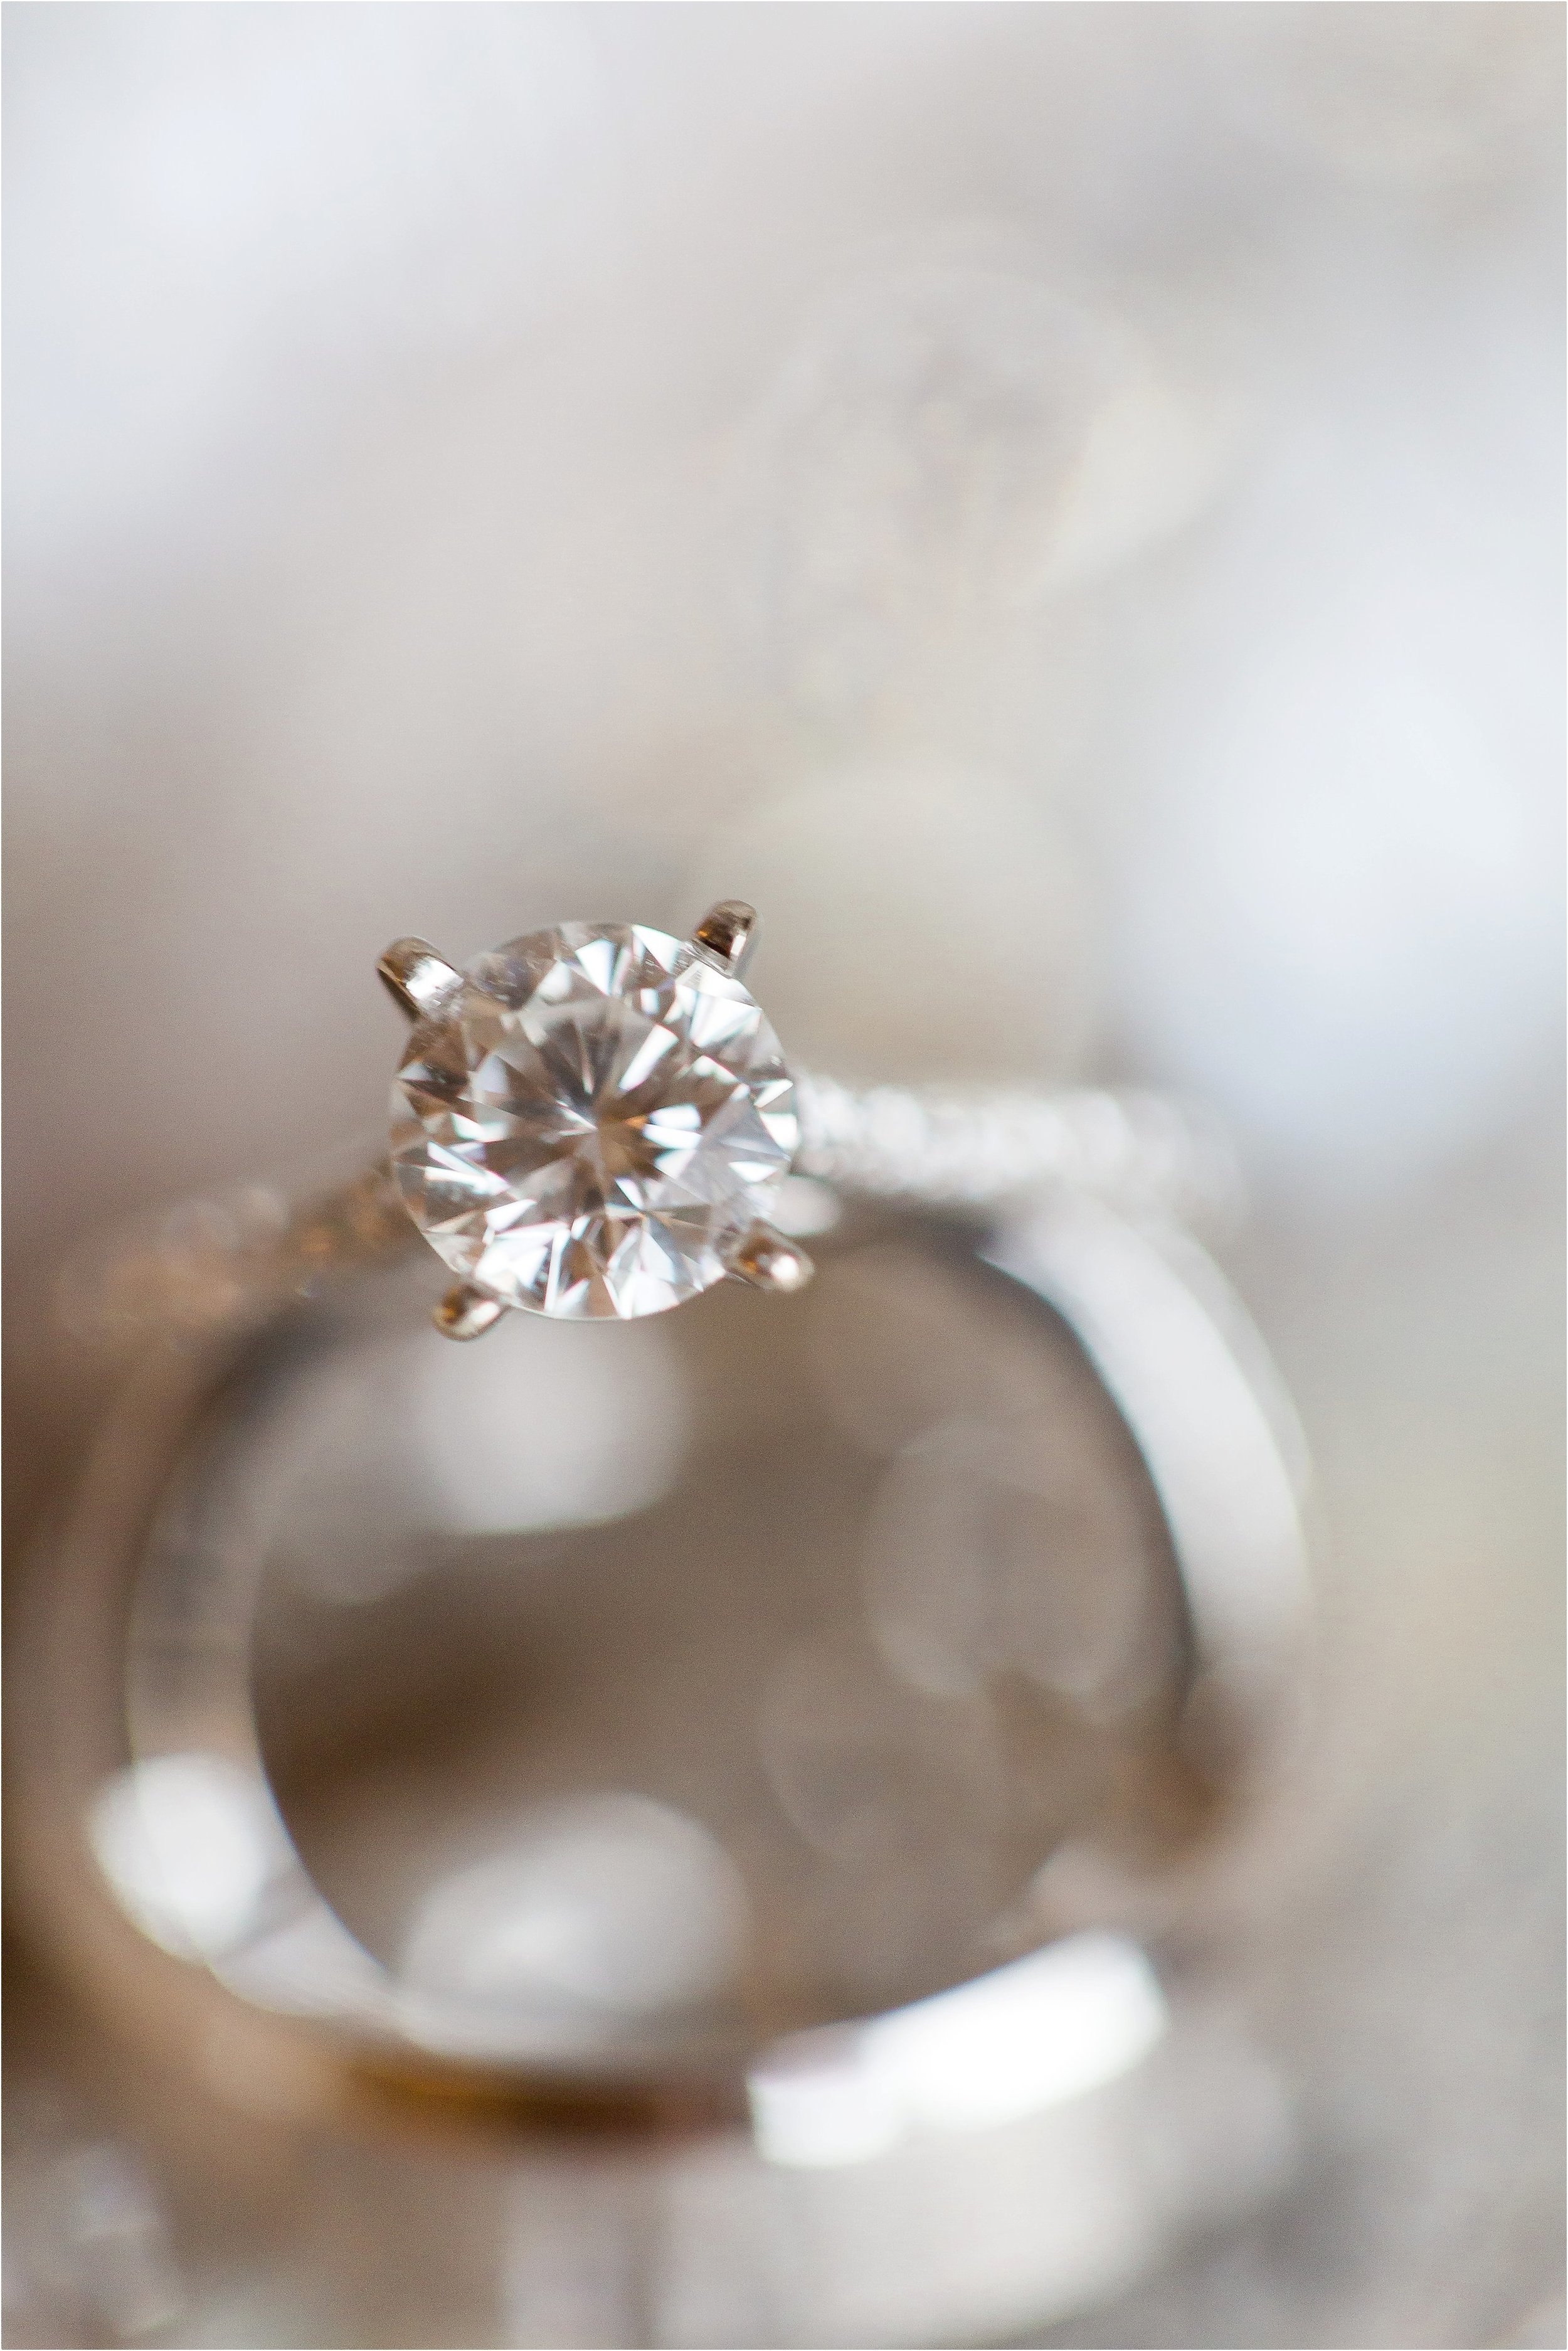 Solitaire diamond setting and platinum wedding bands at Wyndham Grand Resort at Bonnet Creek Wedding by PSJ Photography 